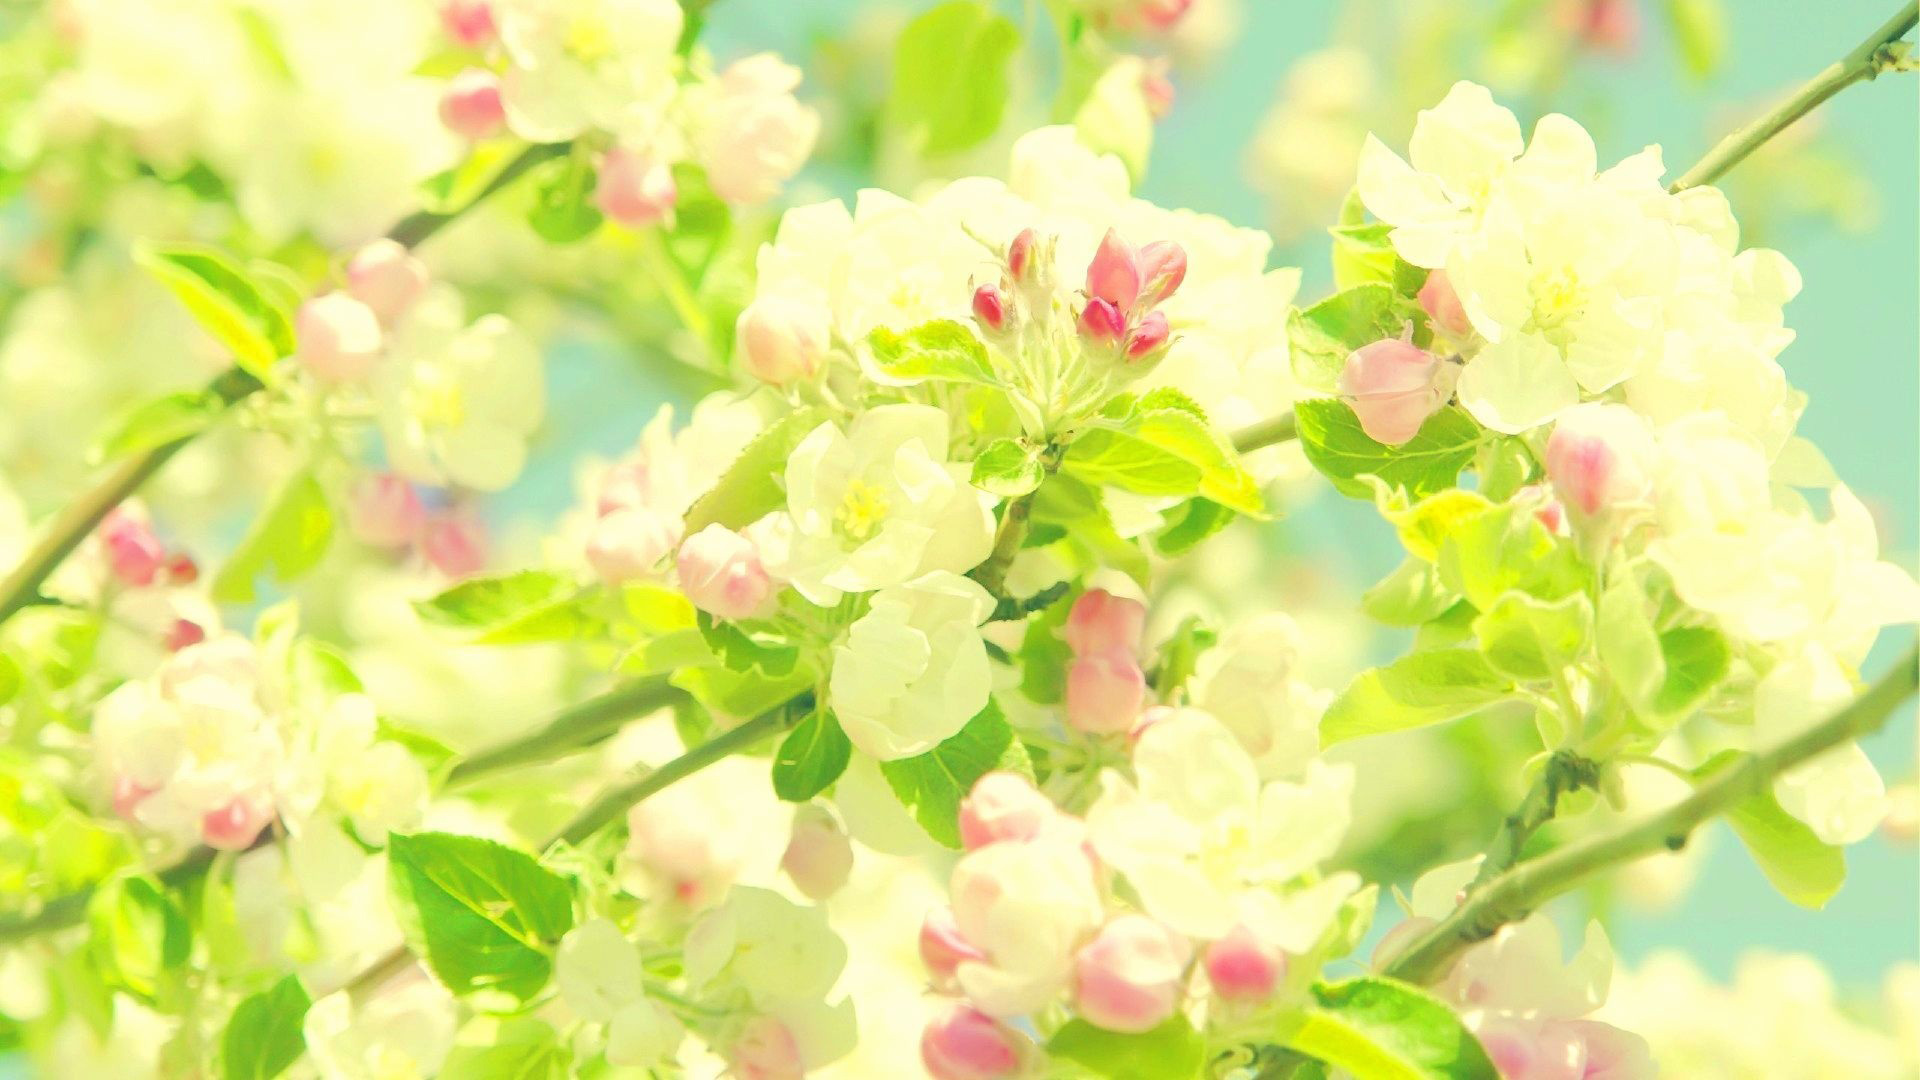 Spring Blossom Flowers With Leaves Branches 2K Spring Wallpaper